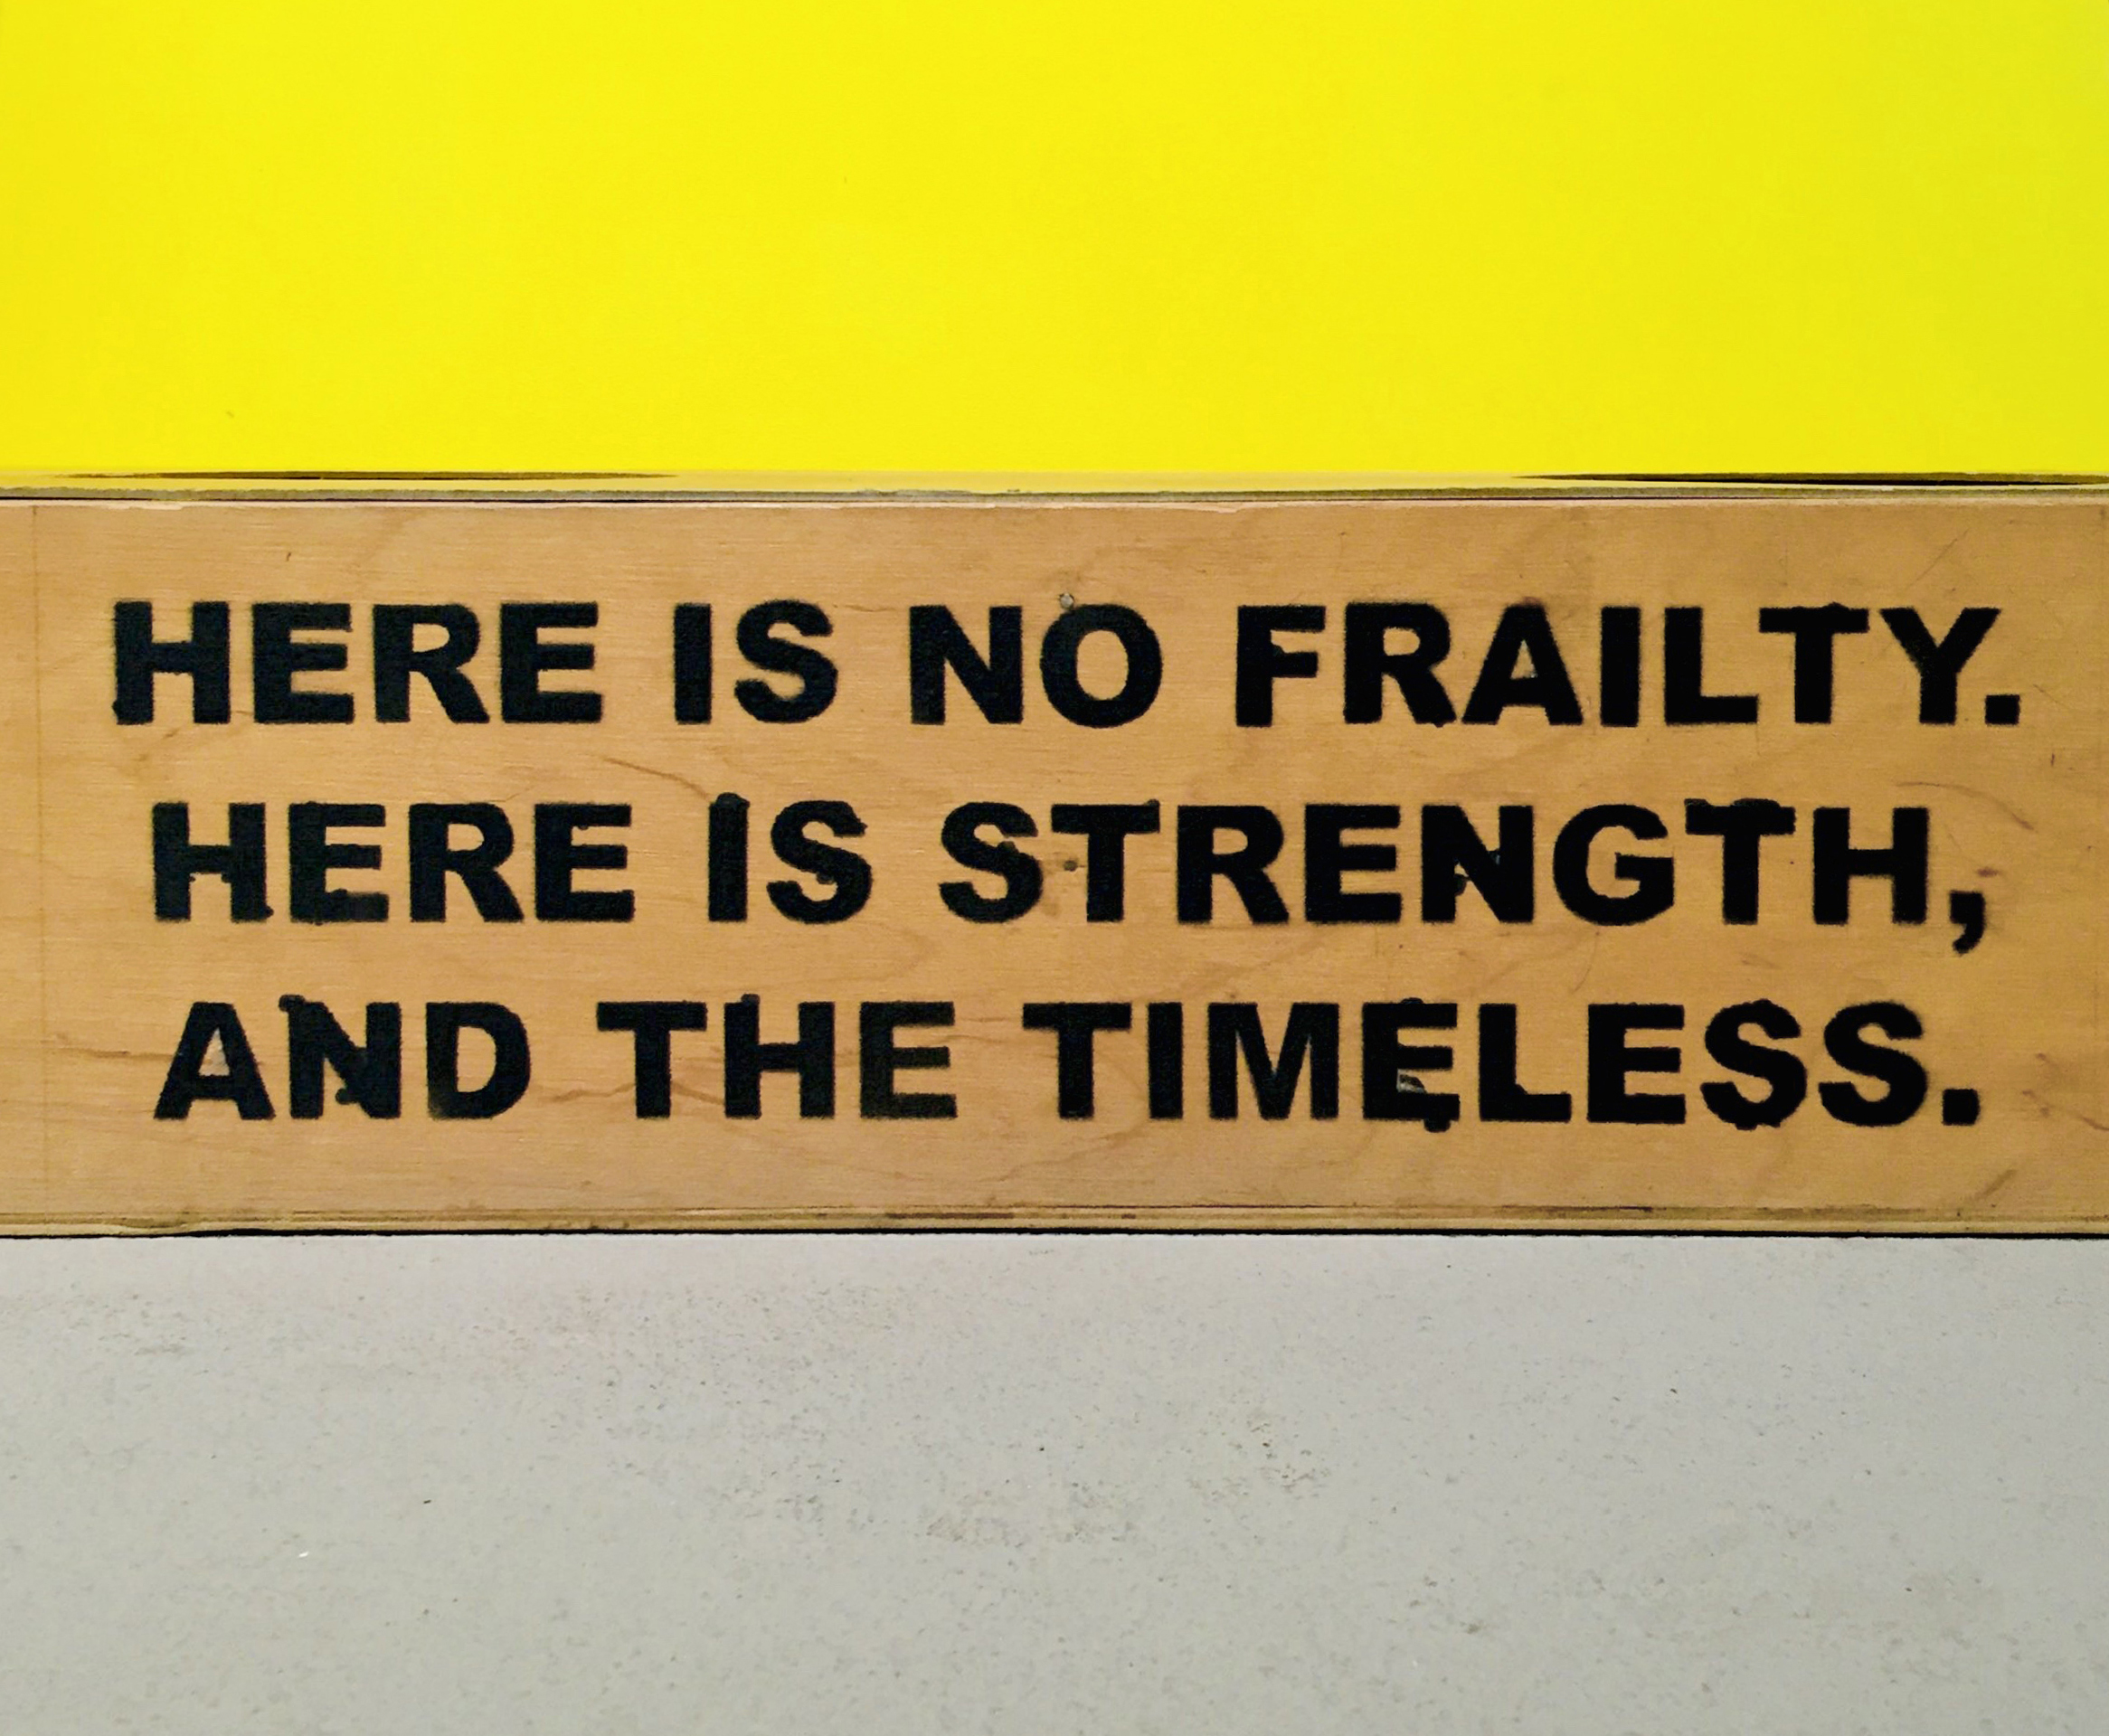 BE IMPOSSIBLE, DEMAND THE REAL – Part of OFF Biennale